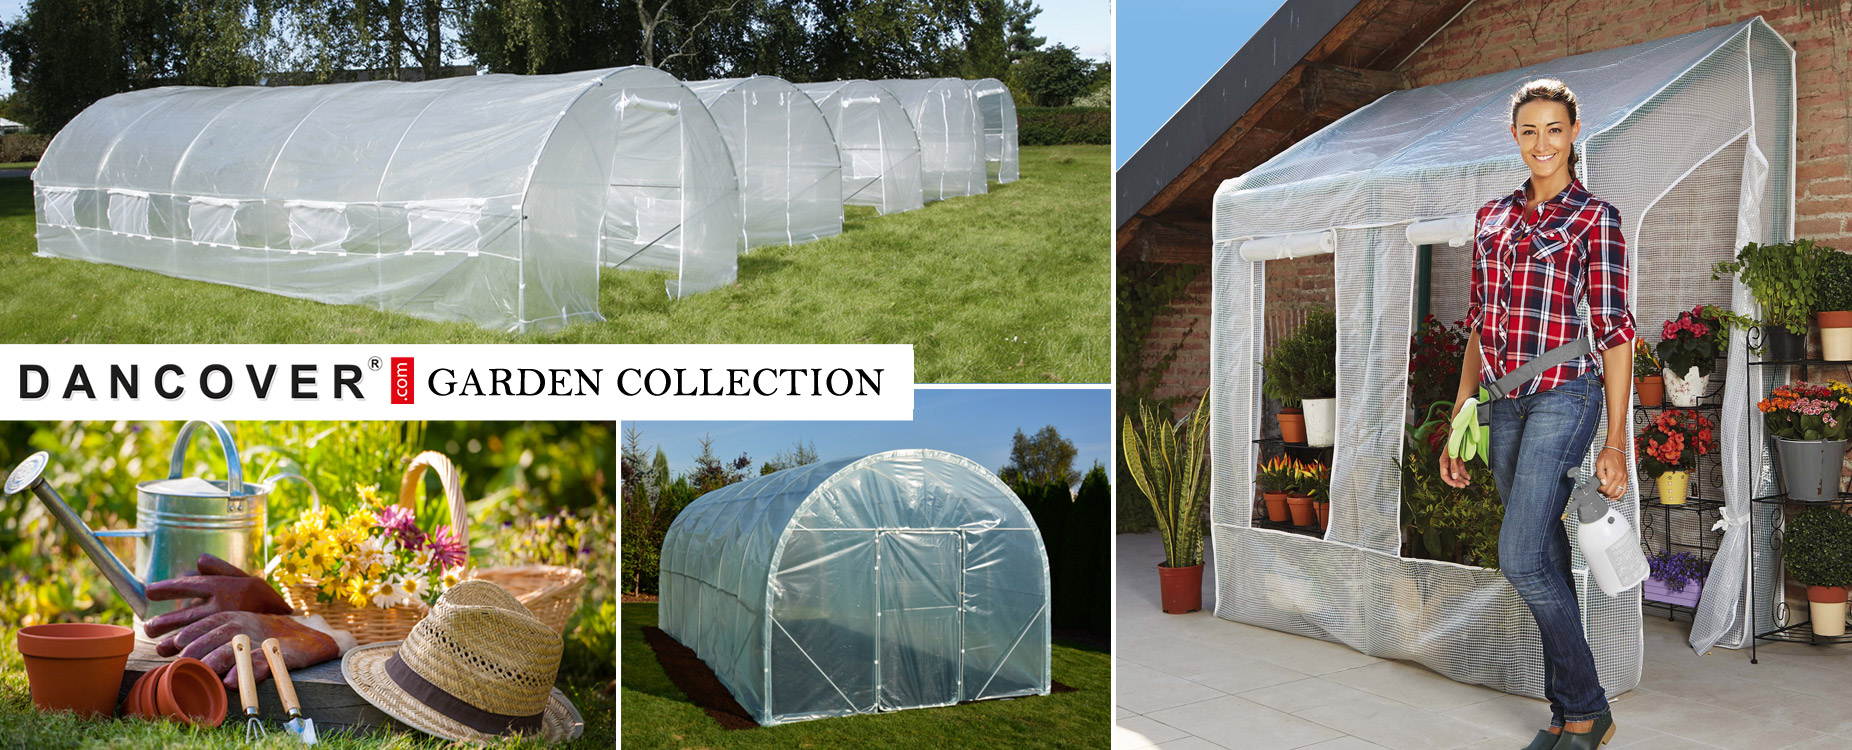 Polytunnel greenhouses from Dancover